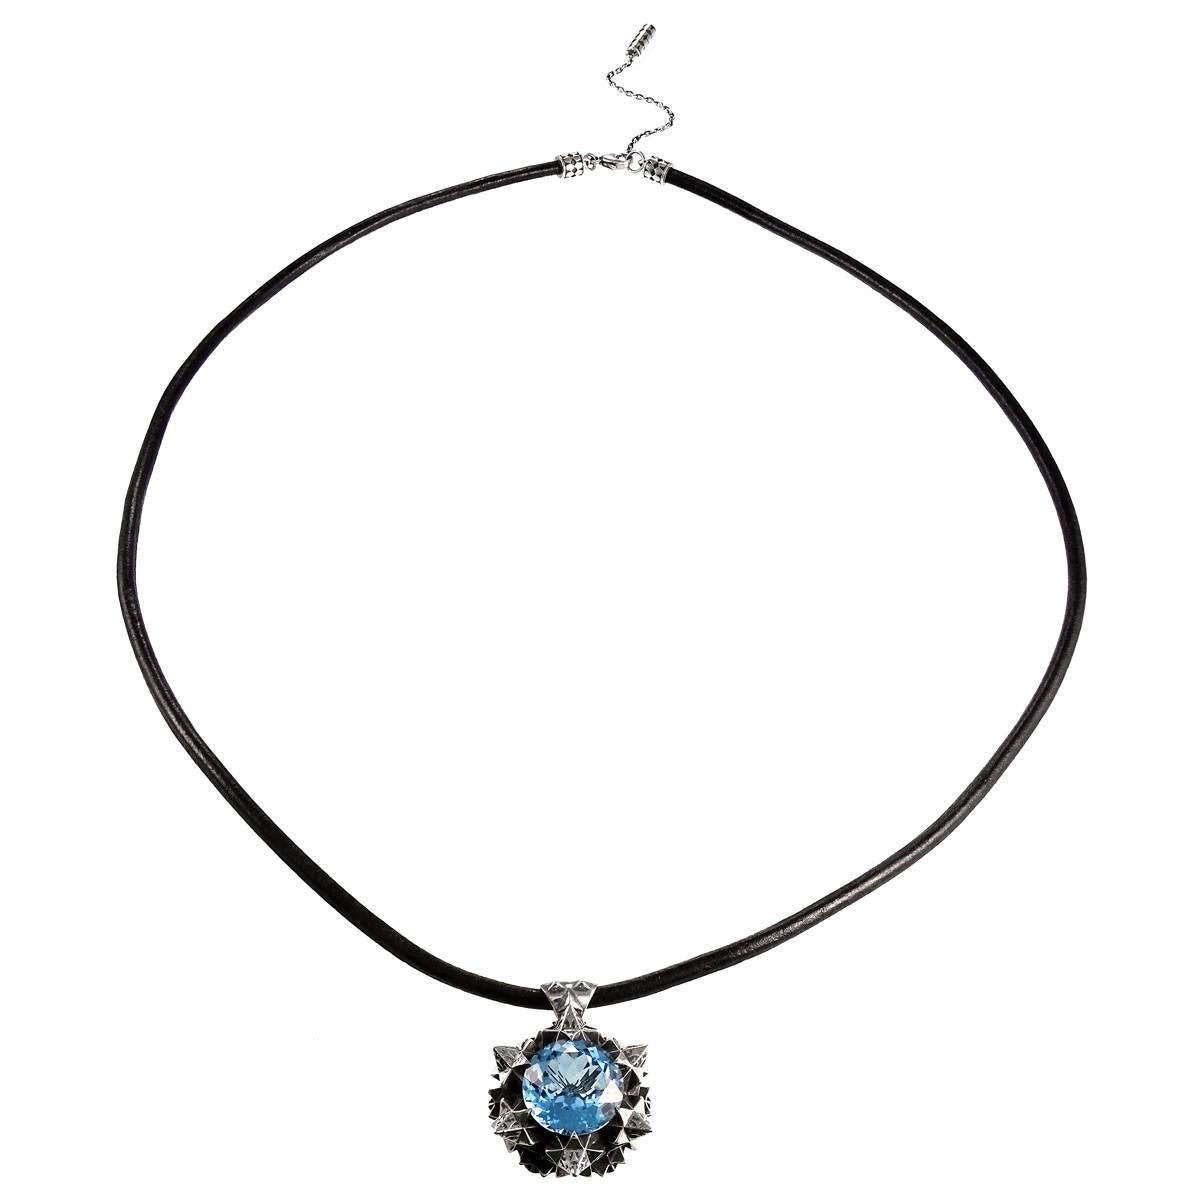 This unique Thoscene Aquamarine Silver Peace Pendant Necklace features an aquamarine stone set in sterling silver. All of the pieces, including this pendant necklace, in John Brevard’s Thoscene collection are 3D-printed using cutting edge